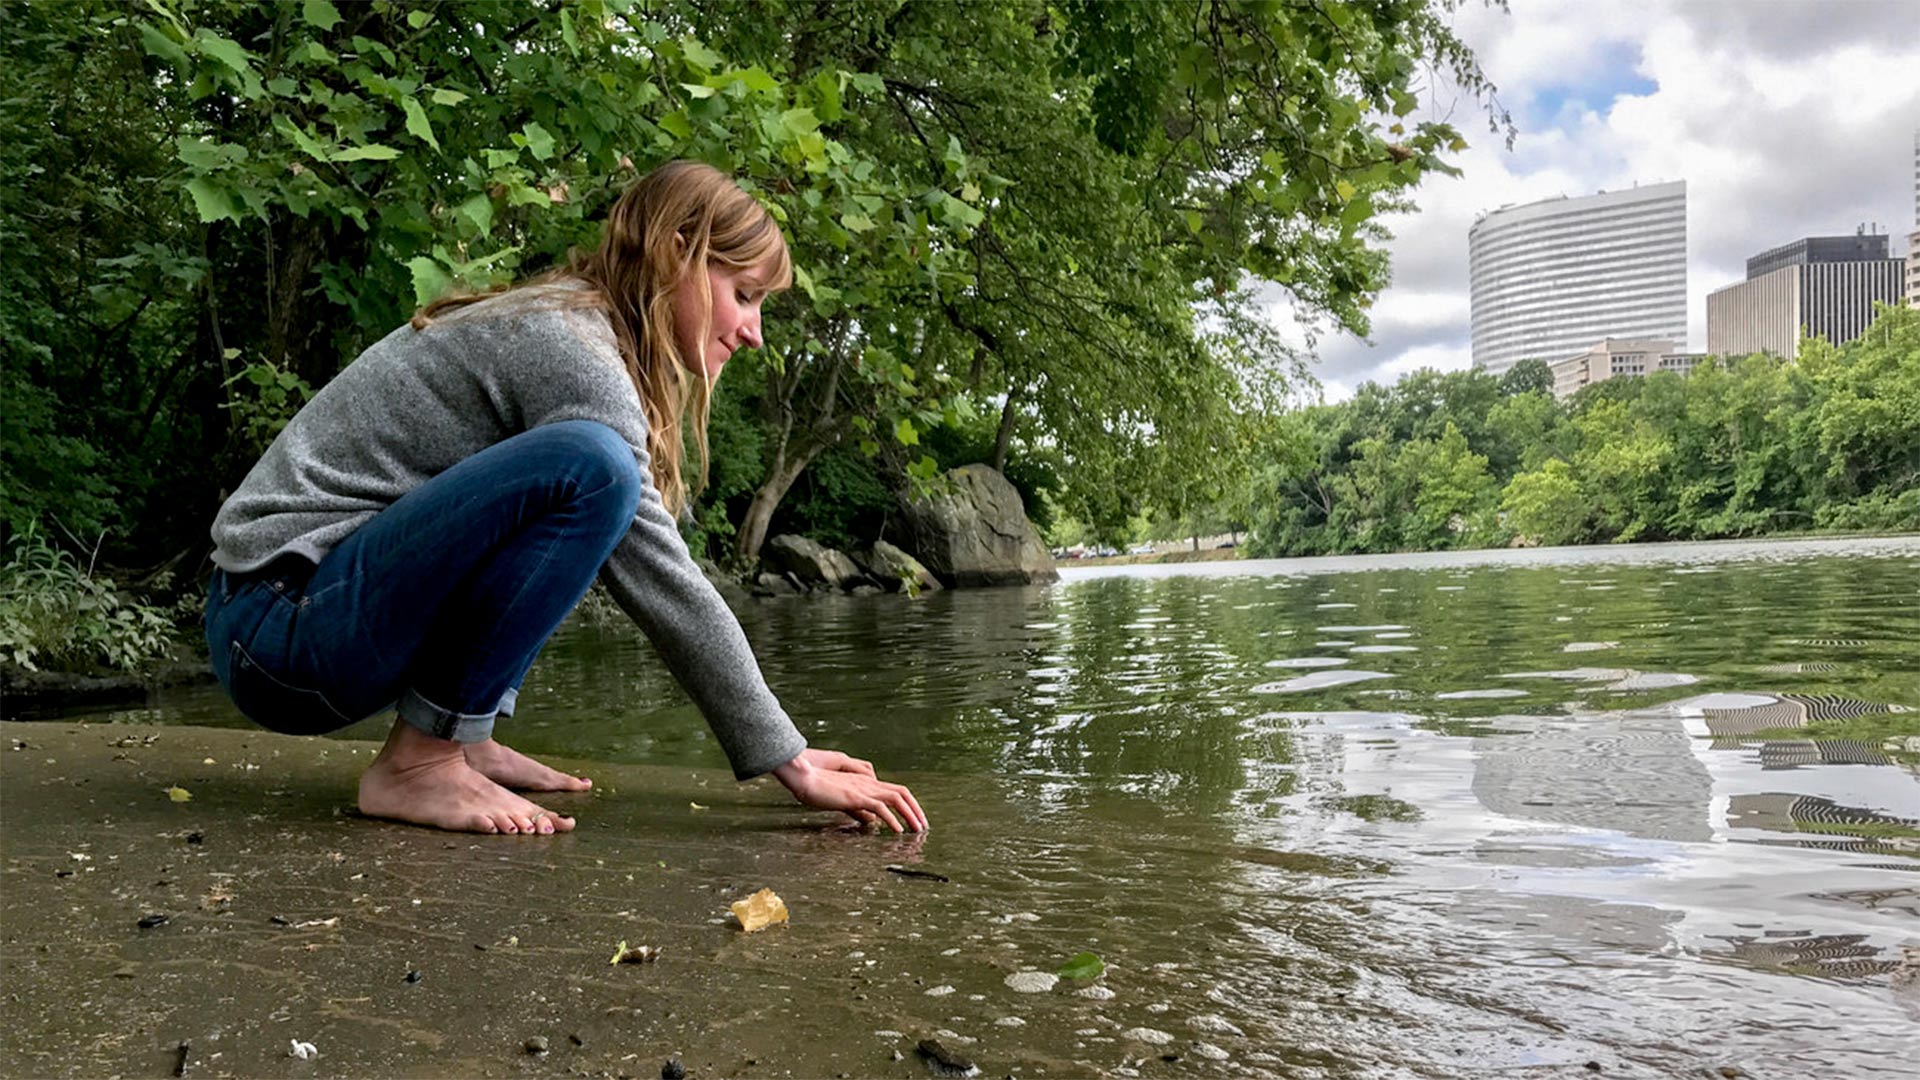 Clare Kelley practices "forest bathing" along the edge of an urban forest on Roosevelt Island, in the middle of the Potomac River. In contrast to hiking, forest bathing is less directed, melding mindfulness and nature immersion to improve health.
Allison Aubrey/NPR